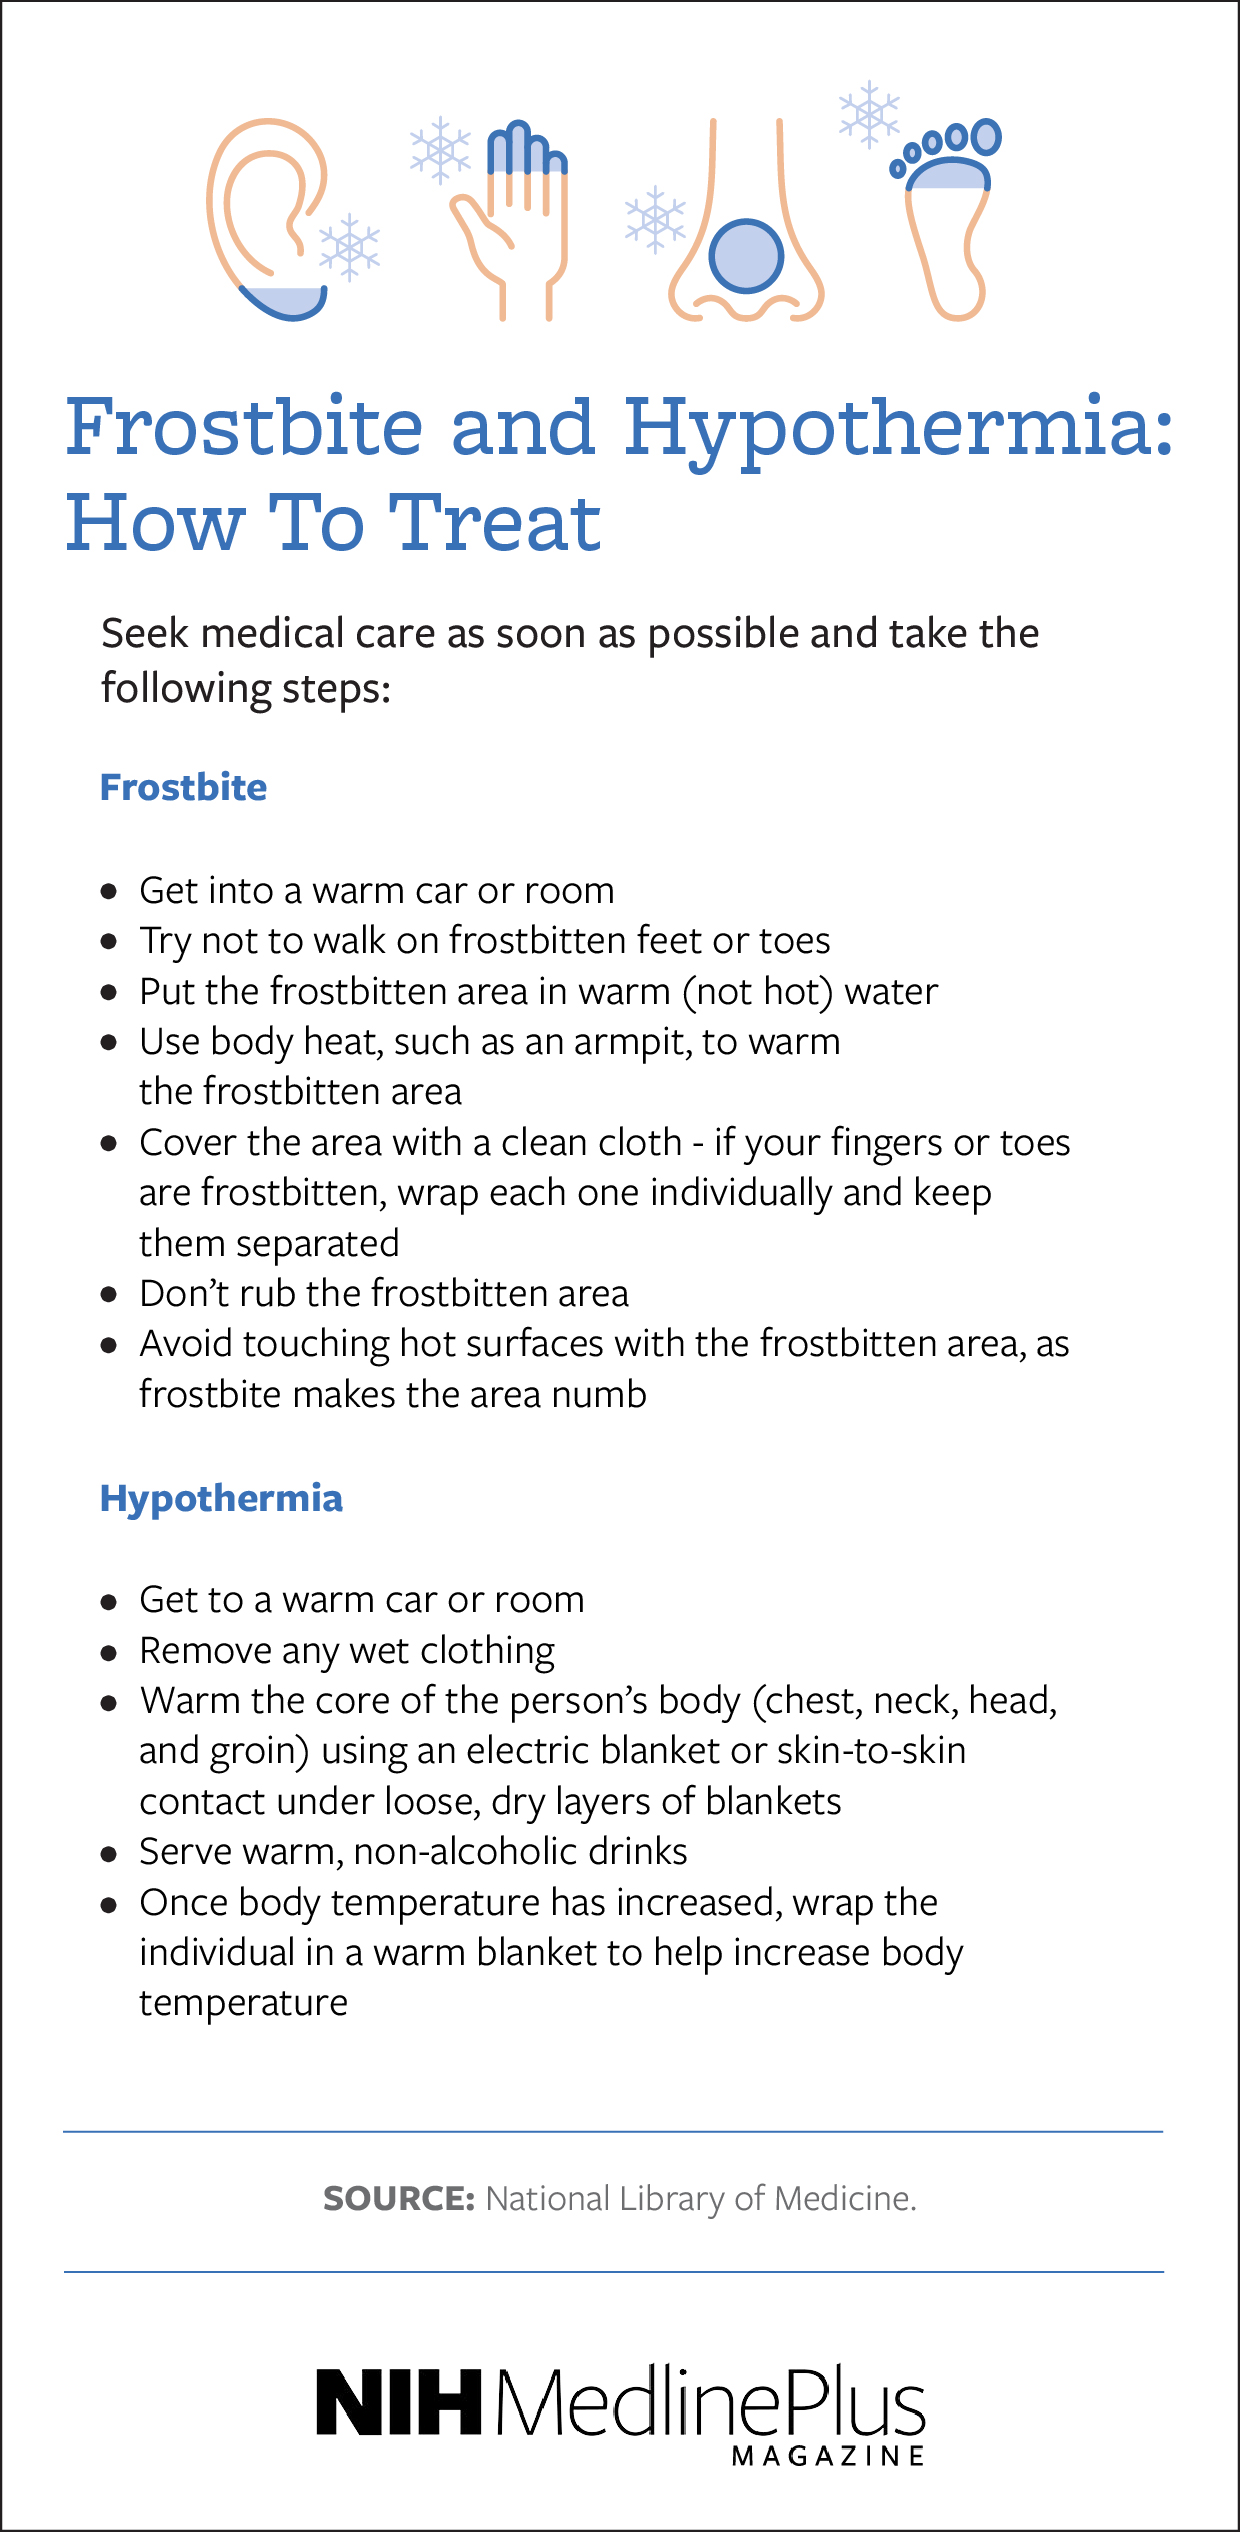 How to Treat
Frostbite  
Seek medical care as soon as possible and take the following steps  

Get into a warm car or room  
Try not to walk on frostbitten feet or toes  
Put the frostbitten area in warm (not hot) water  
Use body heat, such as an armpit, to warm the frostbitten area  
Cover the area with a clean cloth - if your fingers or toes are frostbitten, wrap each one individually and keep them separated  
Don’t rub the frostbitten area  
Avoid touching hot surfaces with the frostbitten area, as frostbite makes the area numb  
Hypothermia  
Seek medical care as soon as possible and take the following steps  

Get to a warm car or room  
Remove any wet clothing  
Warm the core of the person’s body (chest, neck, head, and groin) using an electric blanket or skin-to-skin contact under loose, dry layers of blankets  
Serve warm, non-alcoholic drinks  
Once body temperature has increased, wrap the individual in a warm blanket to help increase body temperature   